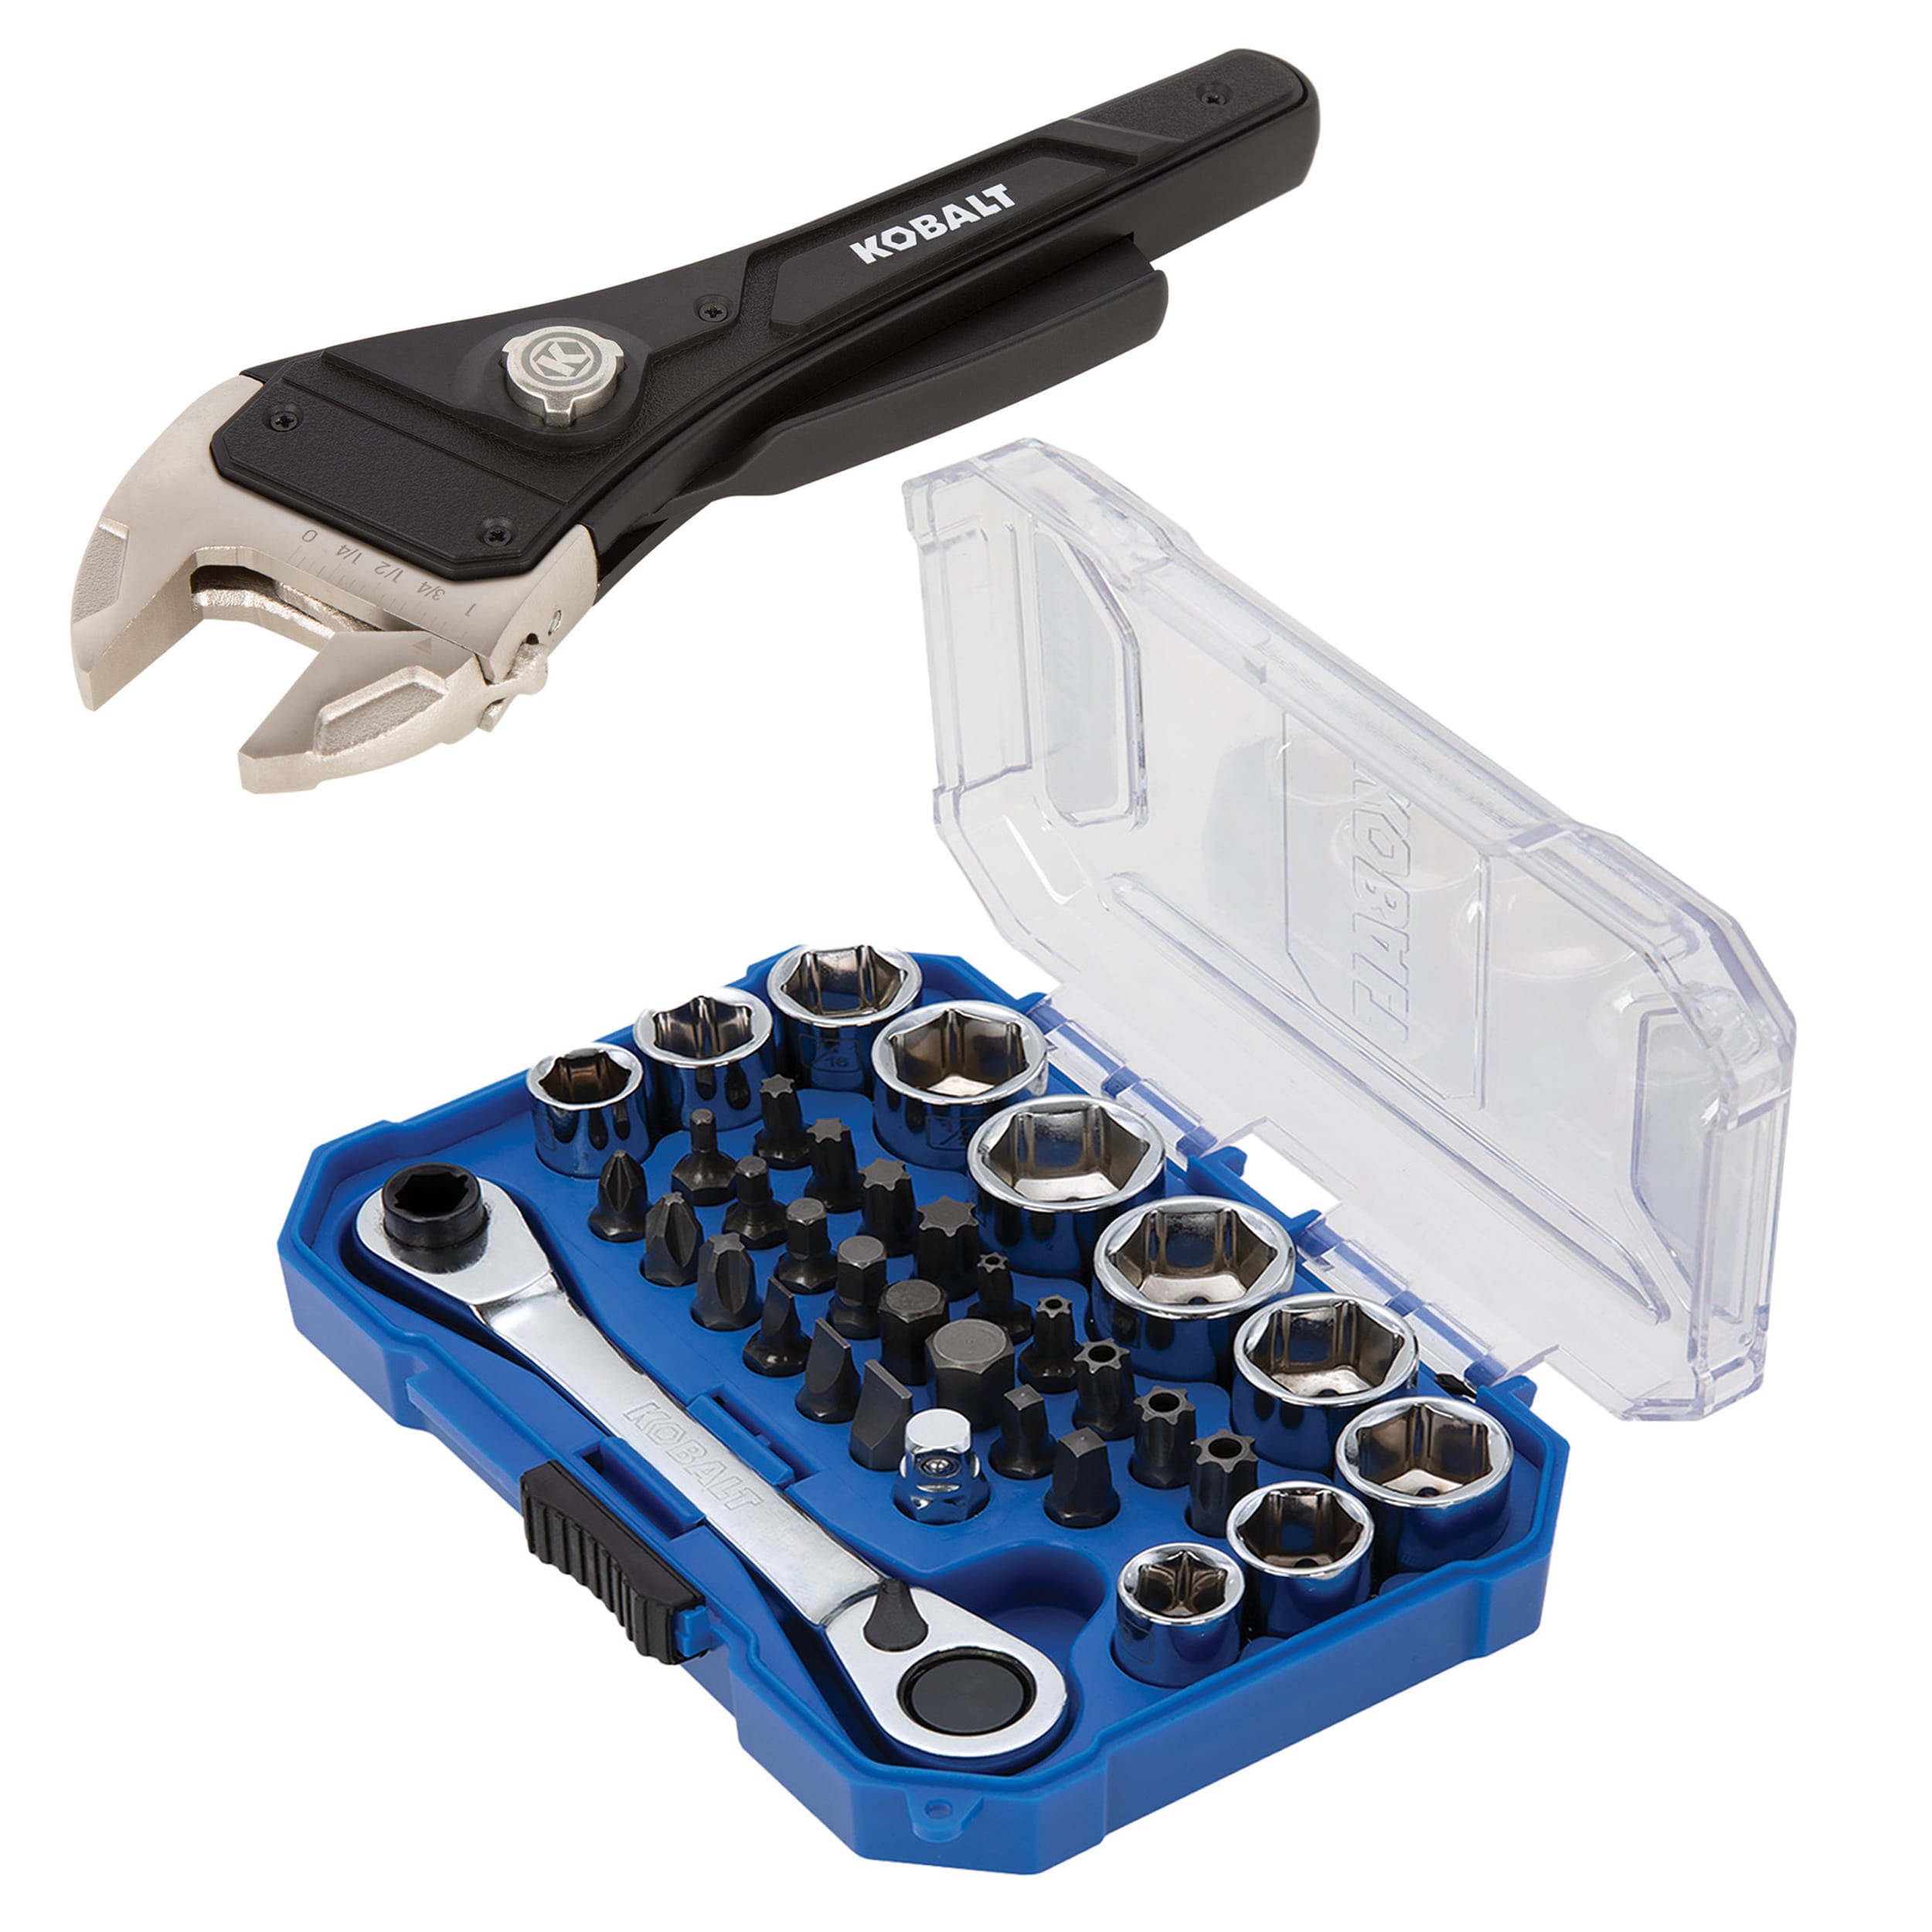 Mechanics Tool the Mechanics Hard at with Tool department 35-Piece Chrome Kobalt Metric (SAE) Polished Case in Sets Combination Standard Set and